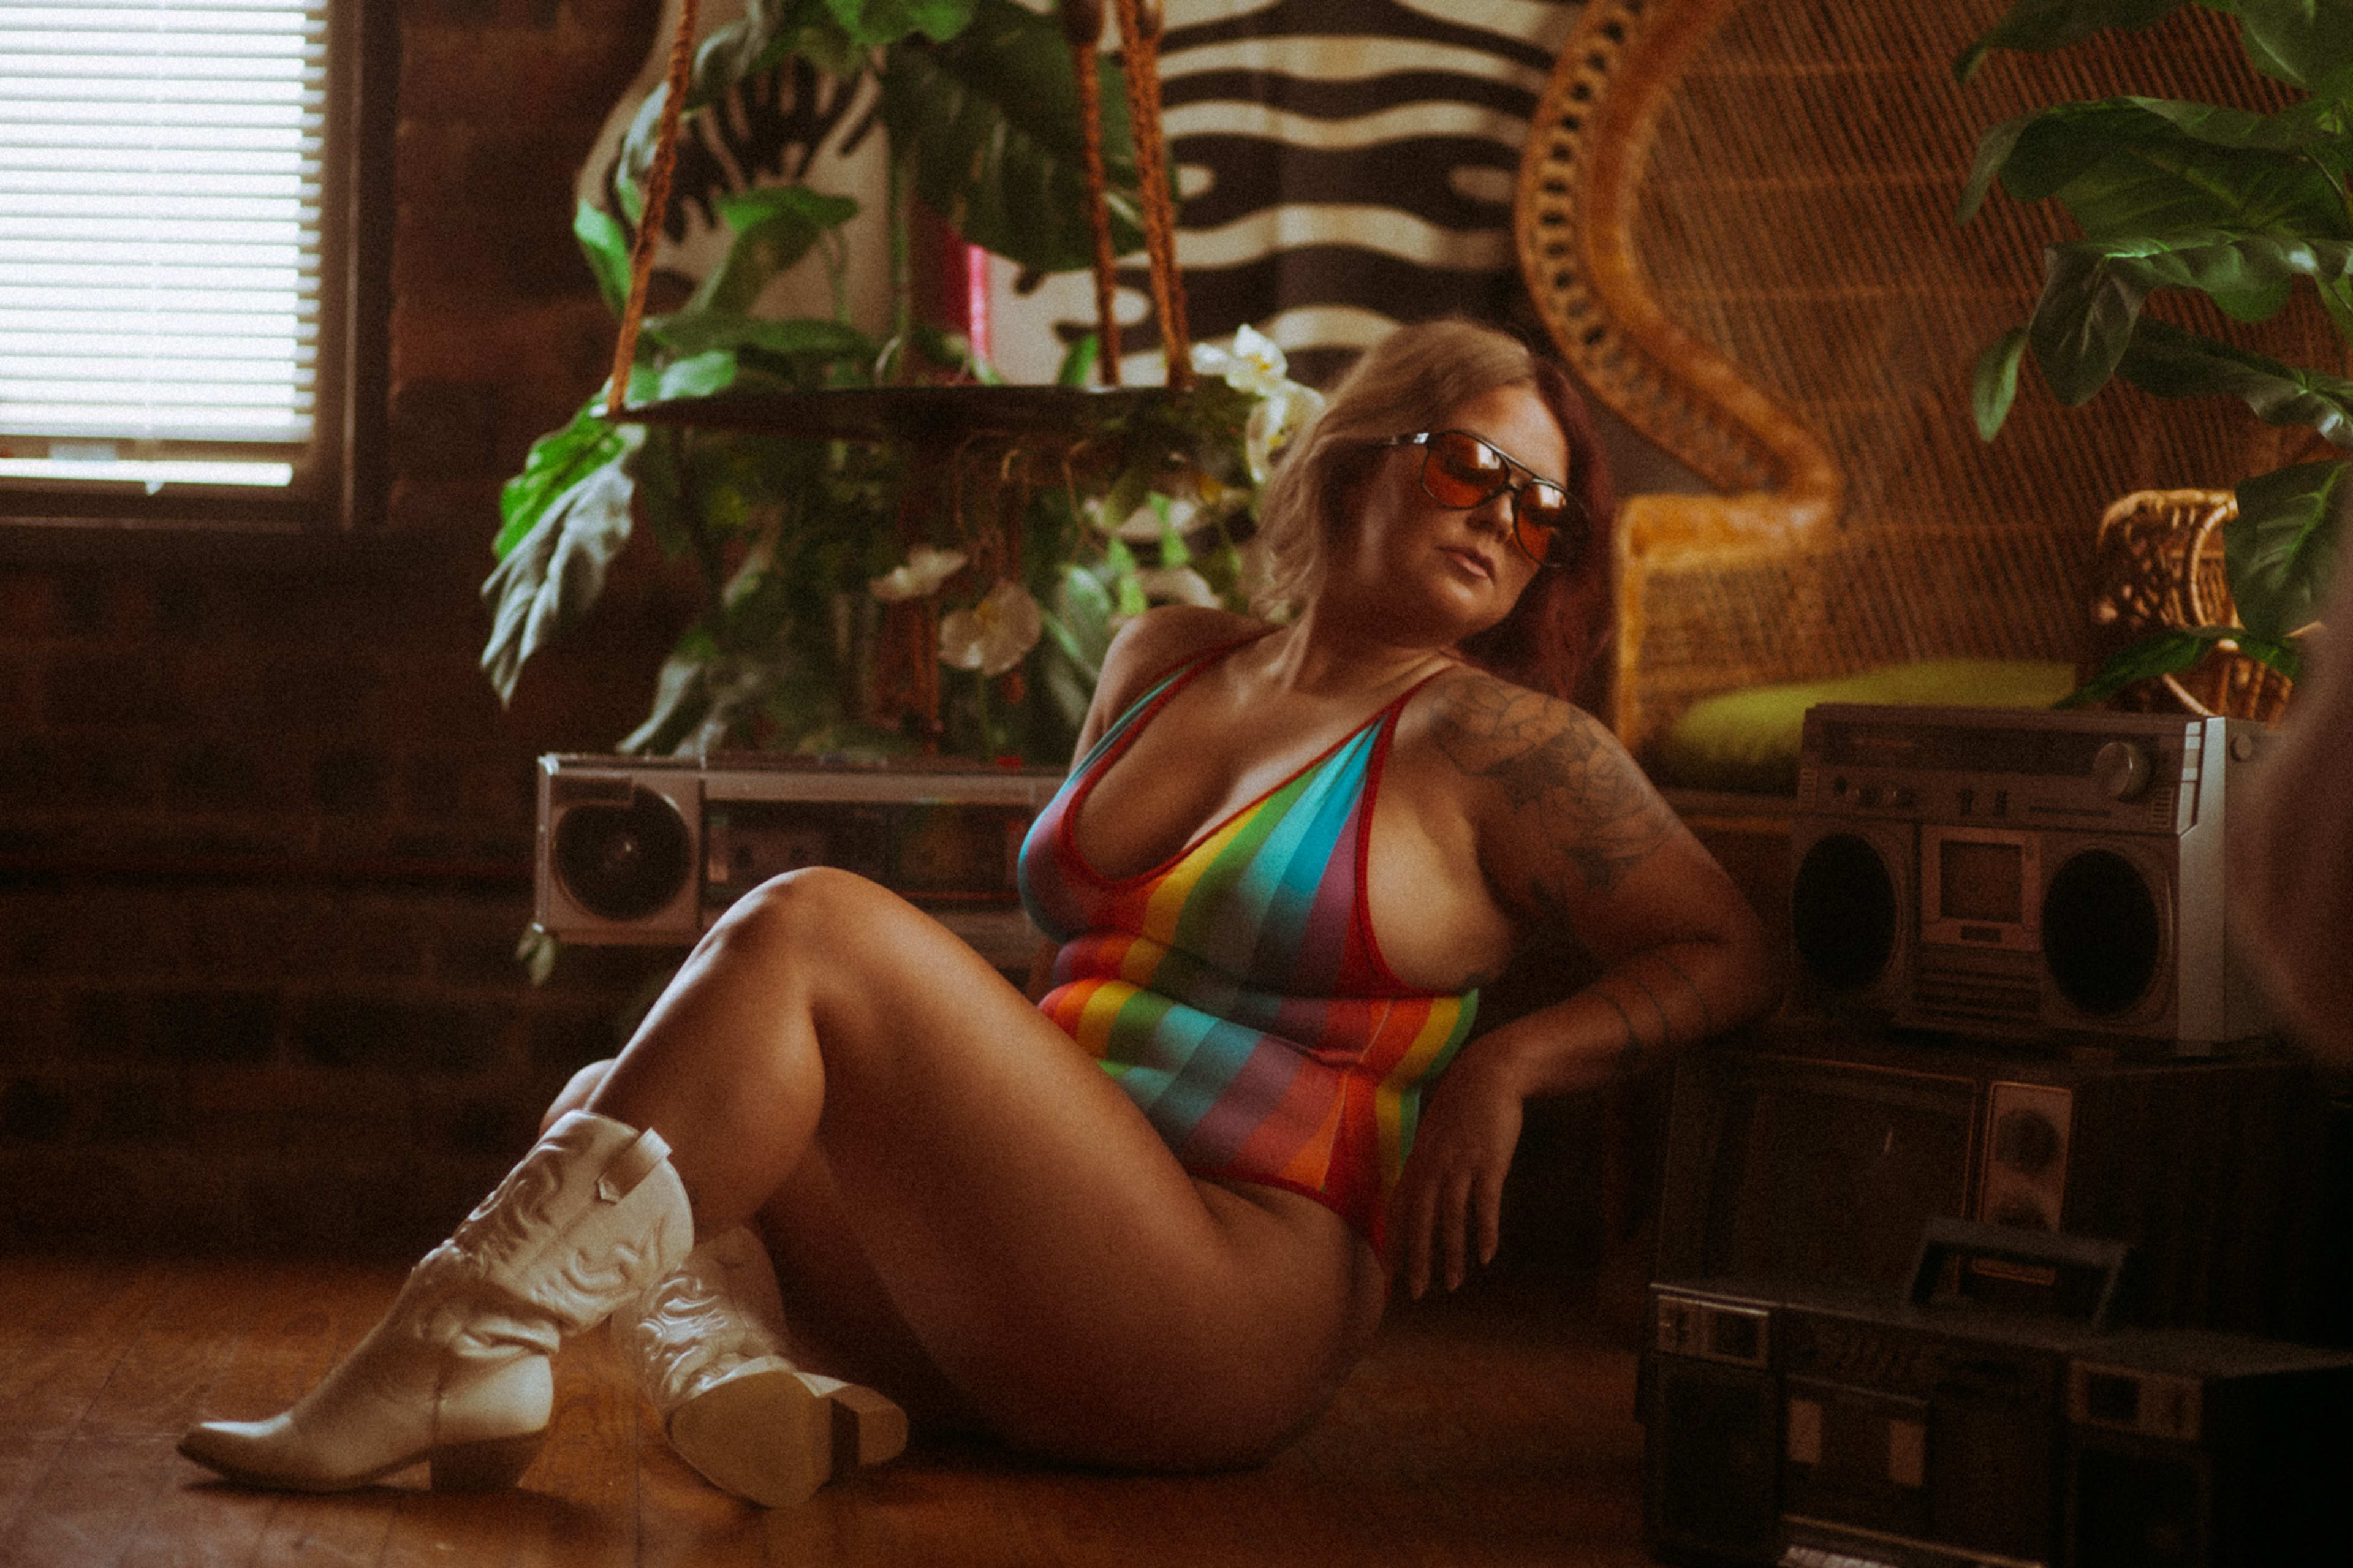 A woman in a rainbow bathing suit lounging on the floor.